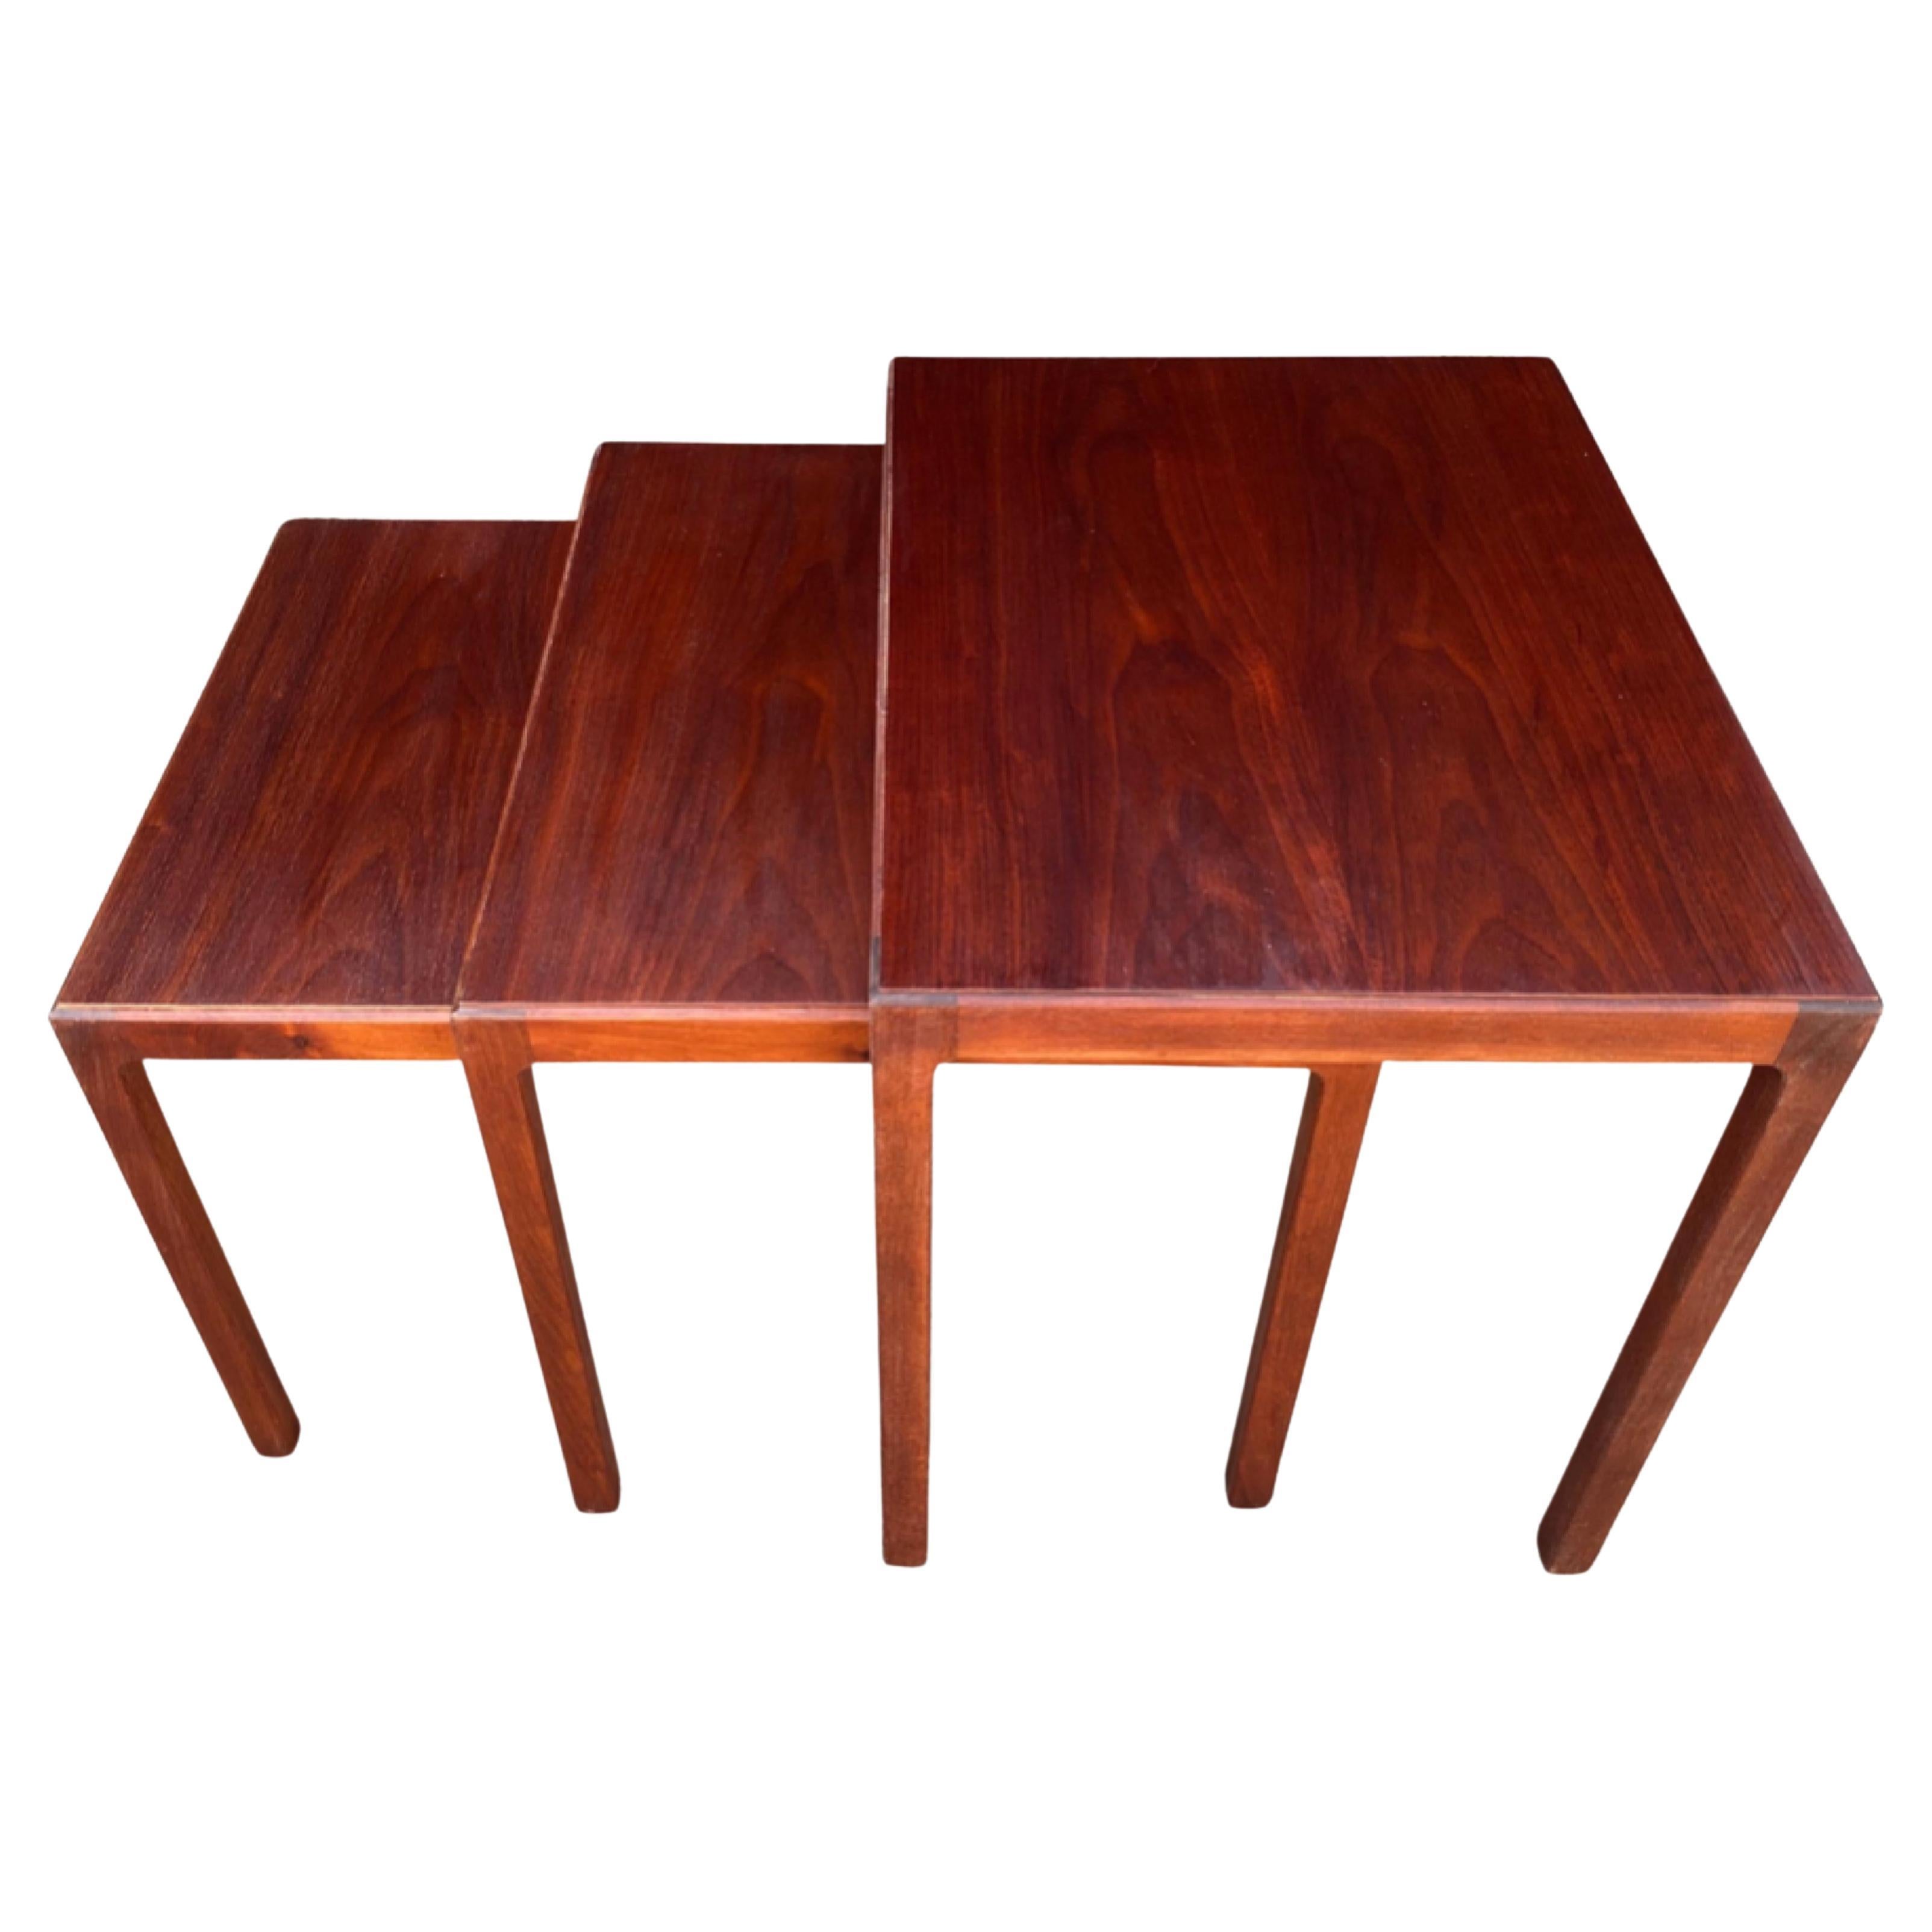 Set of 3 nesting tables in mahogany For Sale